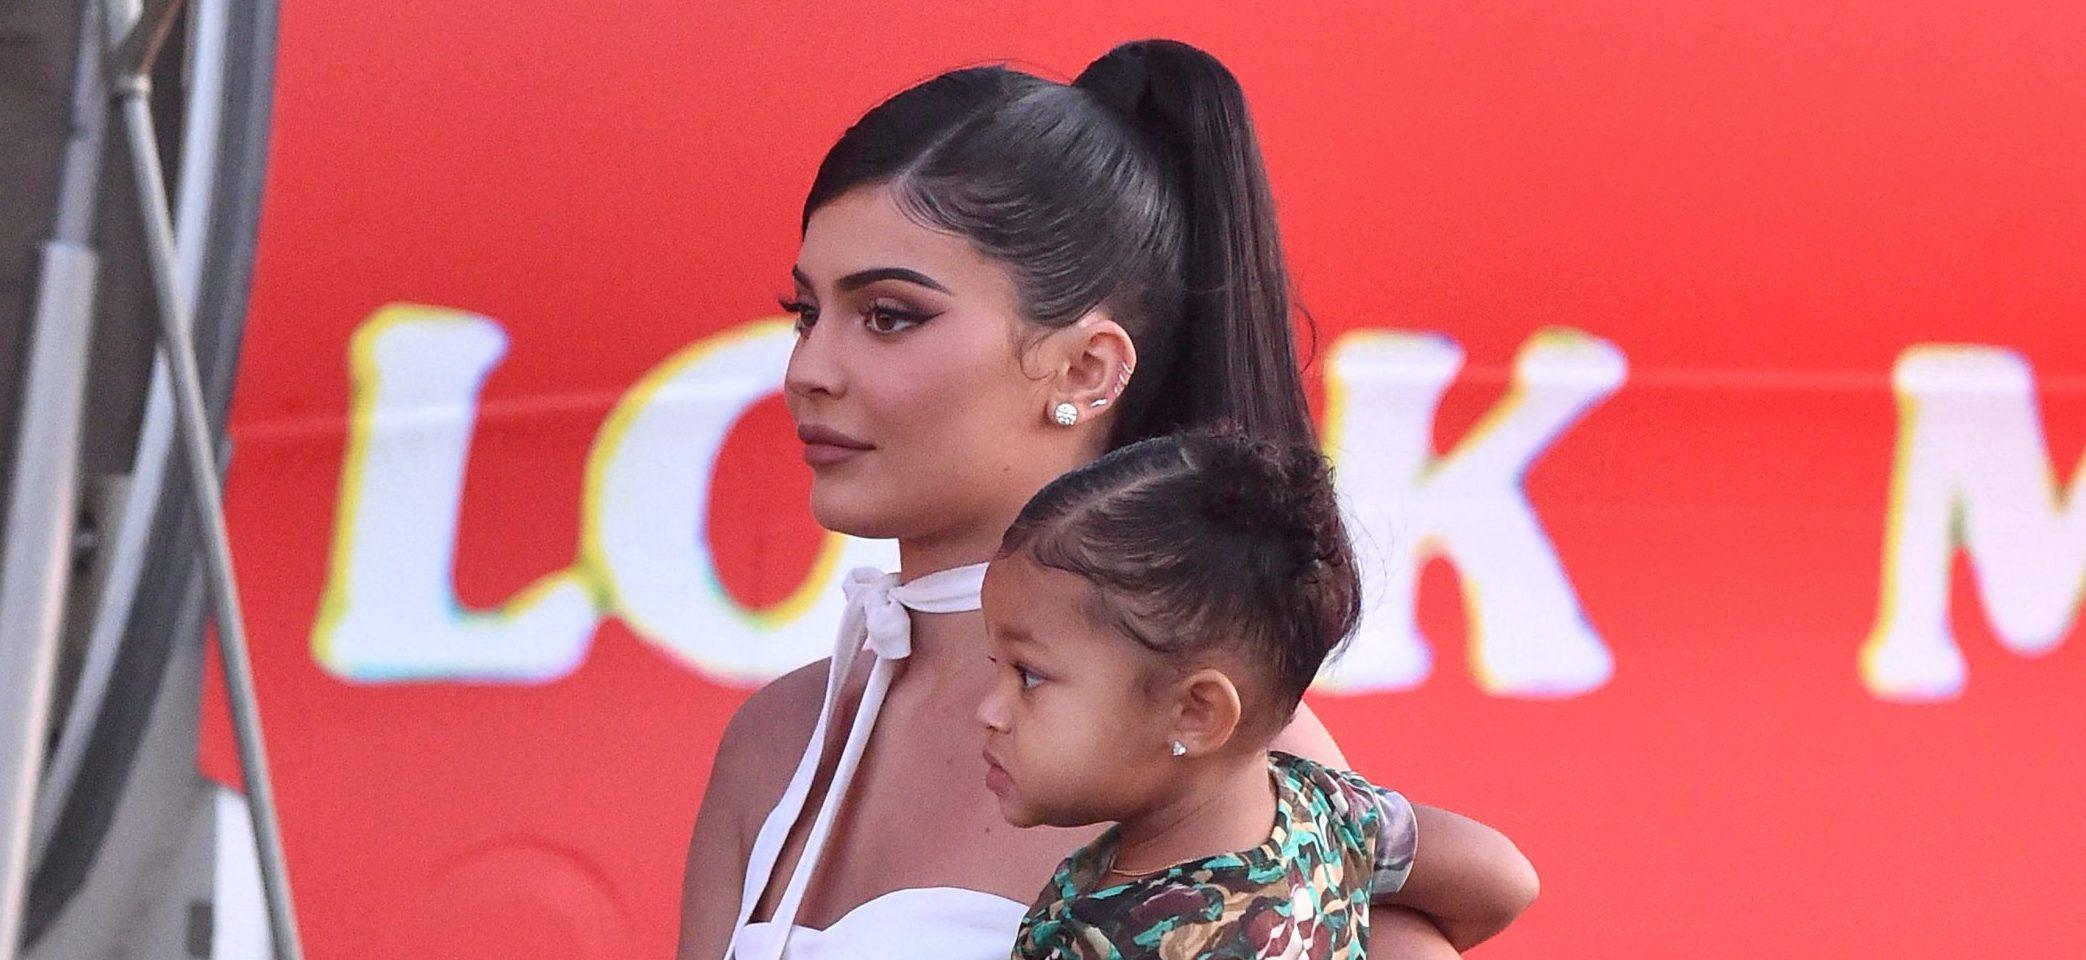 Kylie Jenner Gushes About Daughter Stormi Being A Little Fashionista